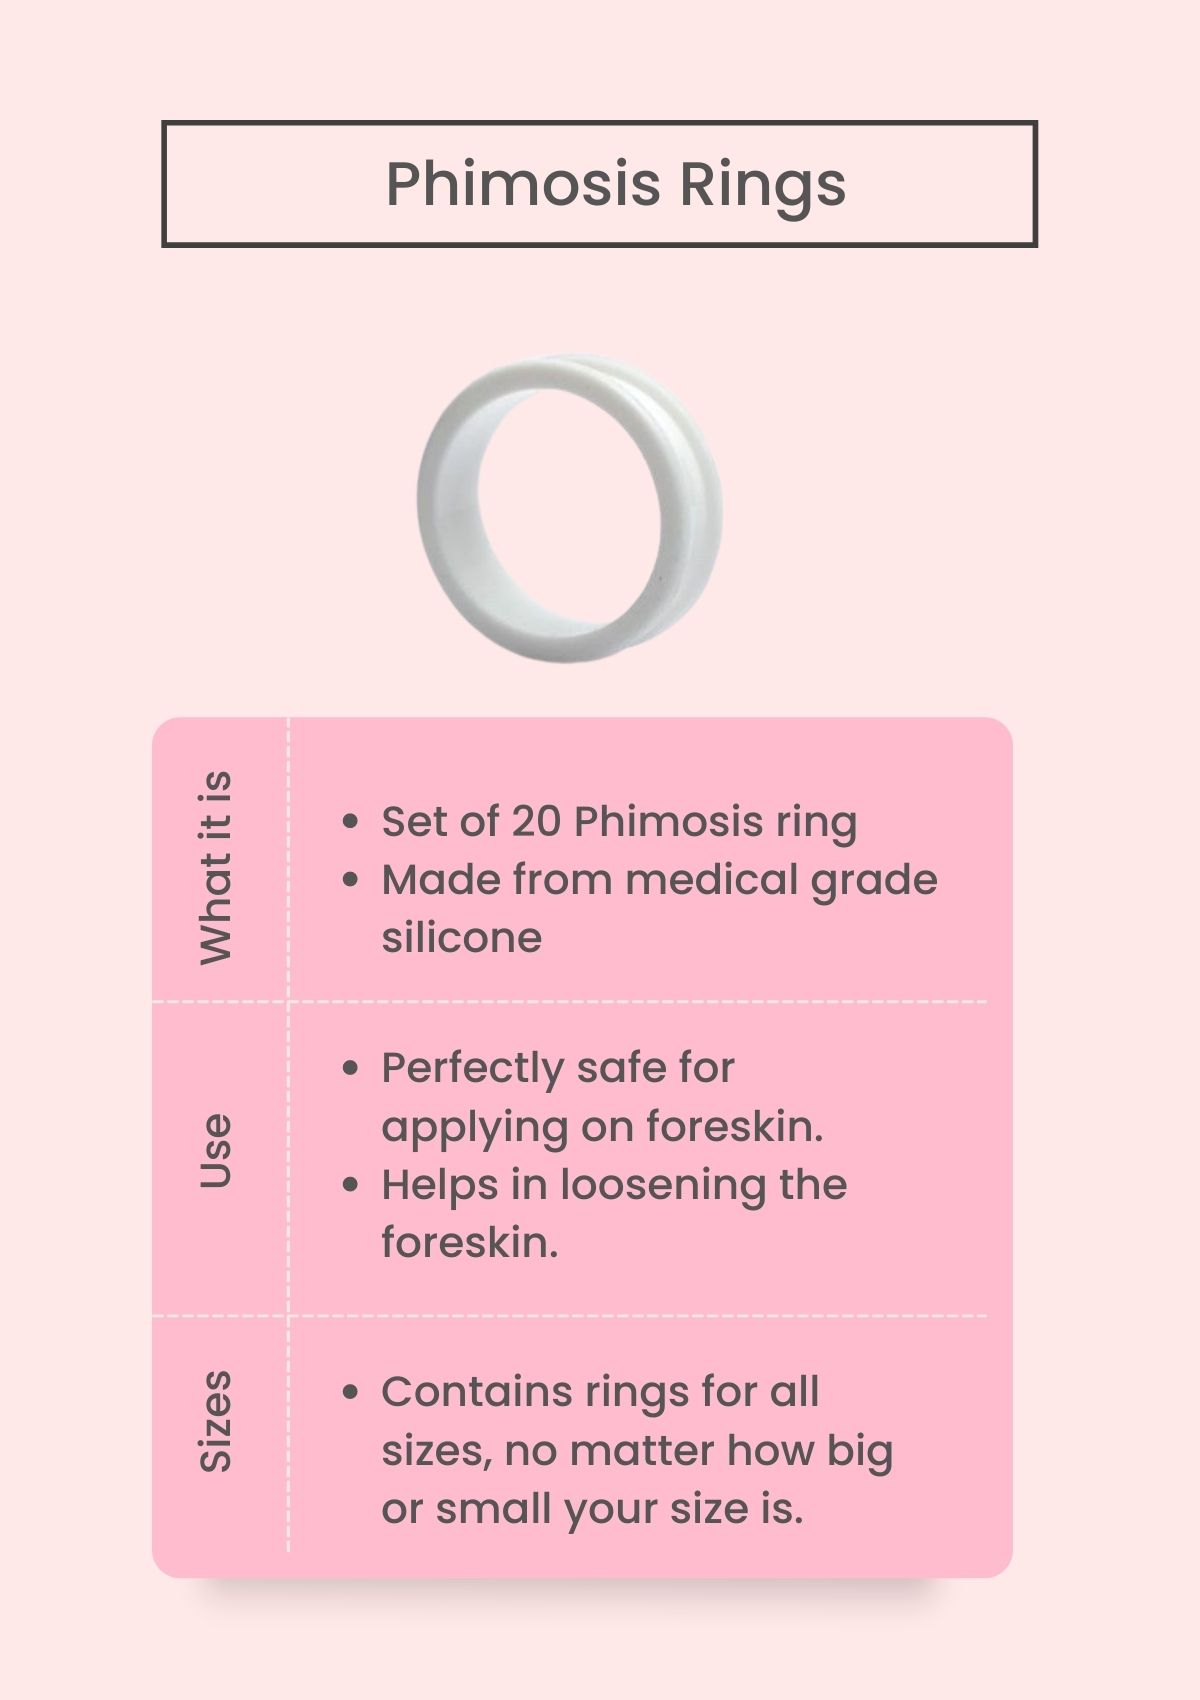 PhimoRing Stretching Ring Kit for Phimosis (20 Piece Assortment)